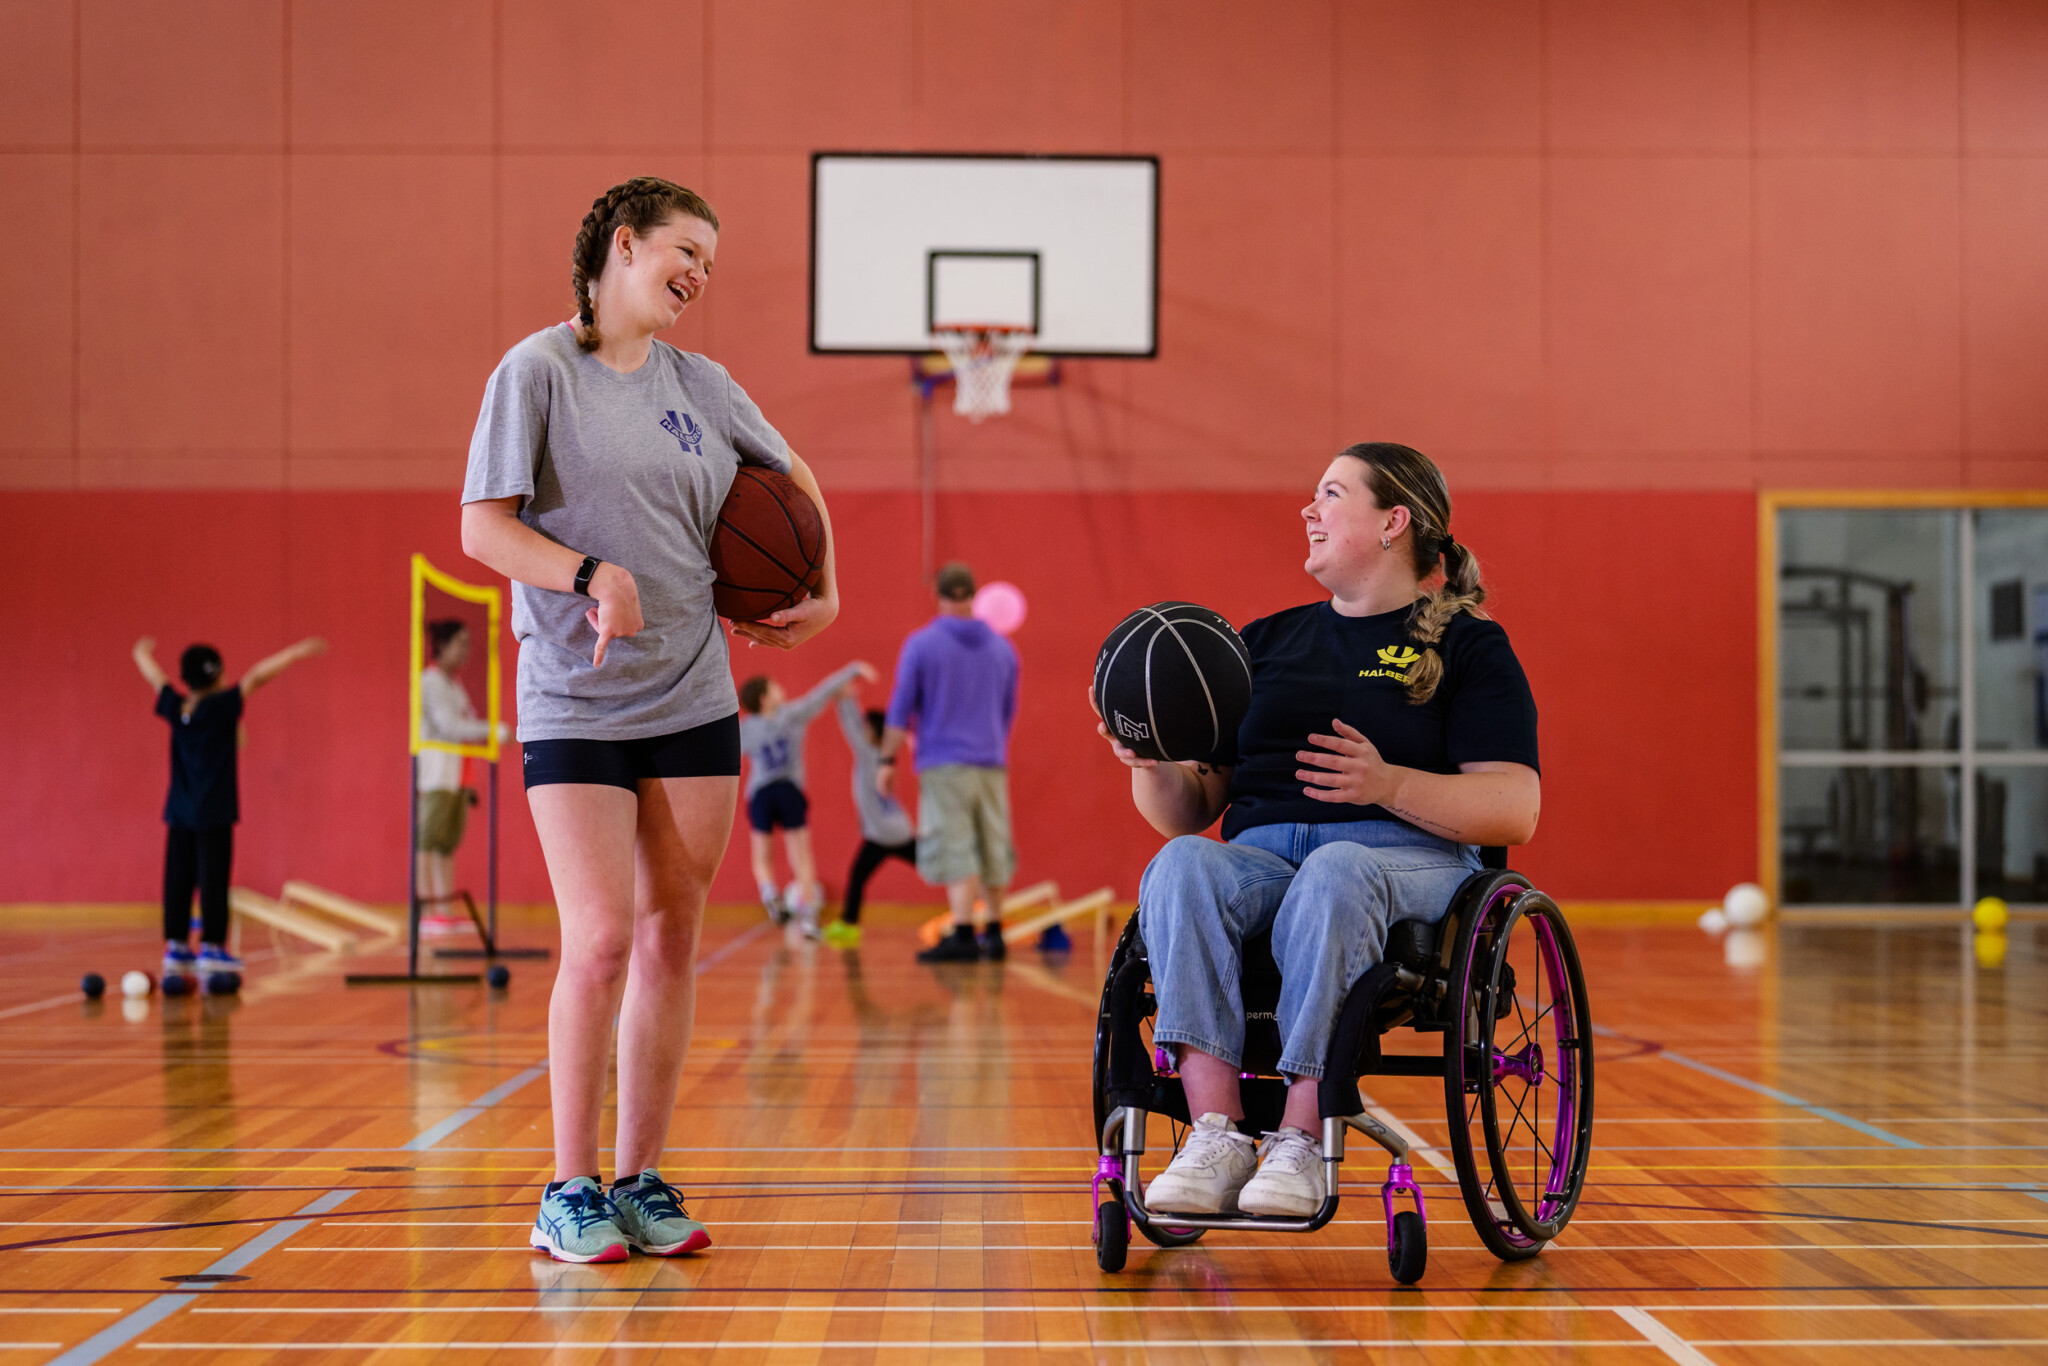 Two women, play basketball in a gym. Women on the right is in a wheelchair